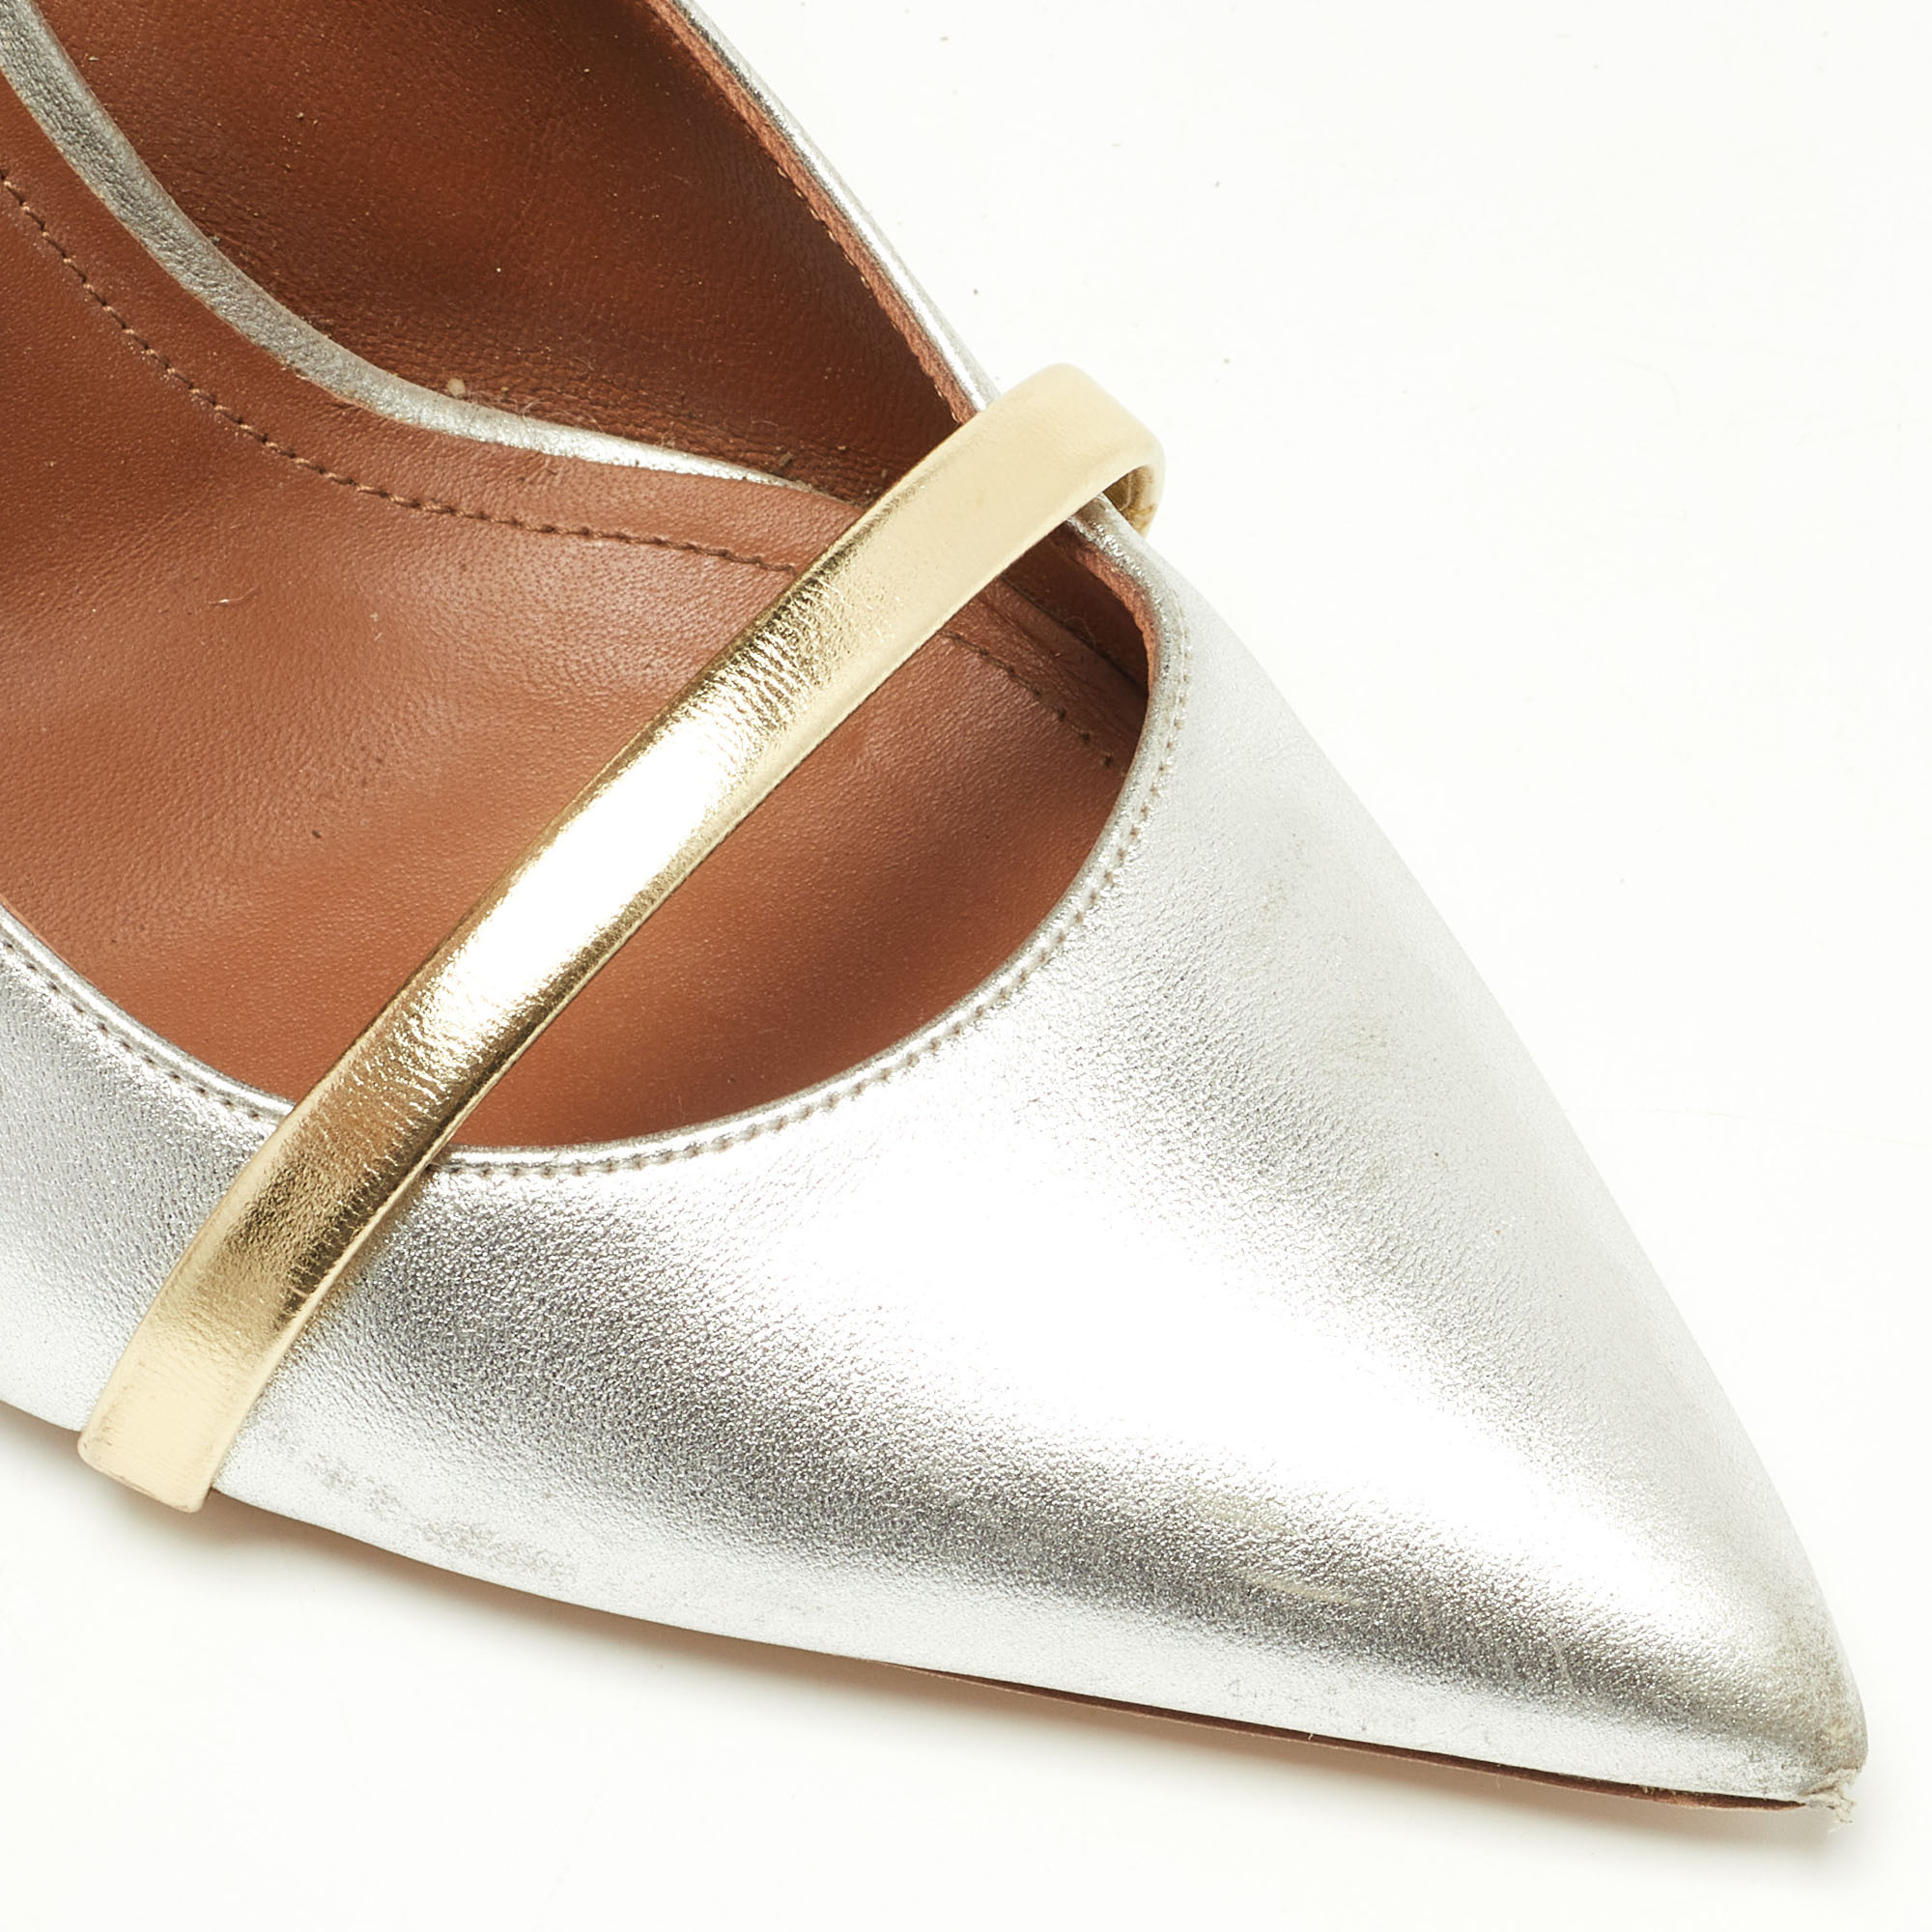 Malone Souliers Silver/Gold Foil Leather Maureen Pointed Toe Pumps Size 40.5